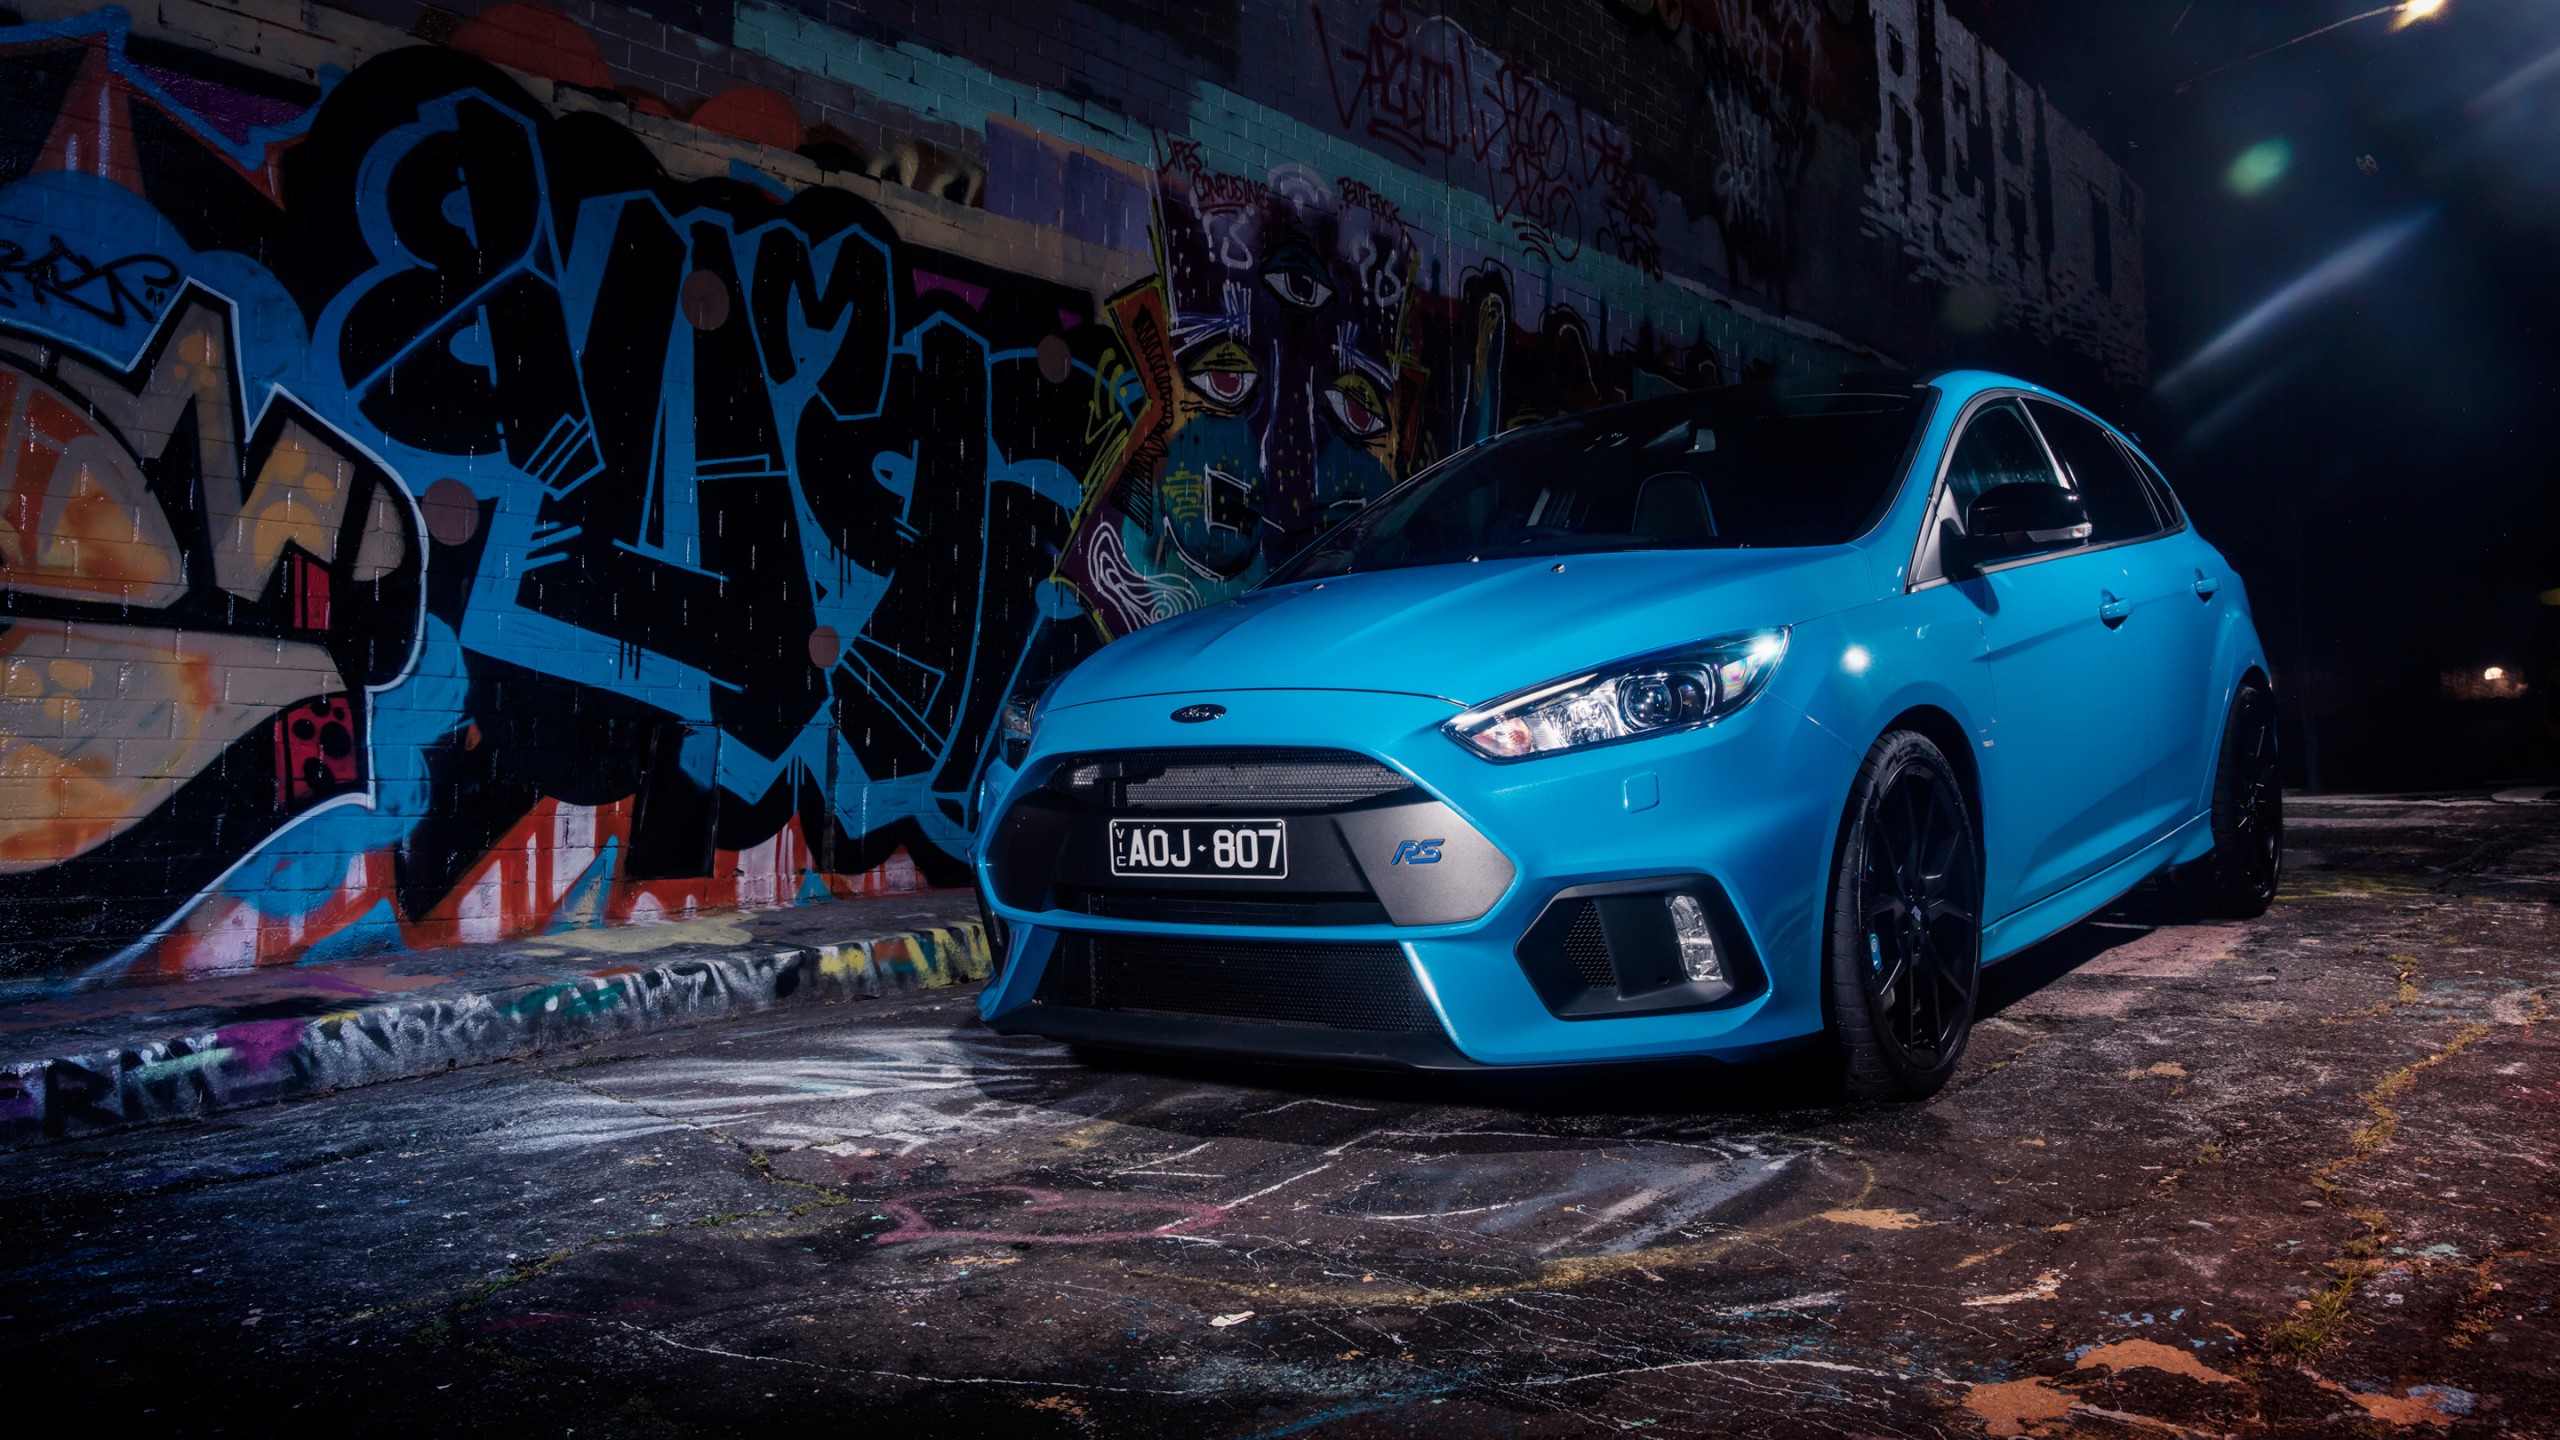 2018 Ford Focus Rs Limited Edition Wallpaper Hd Car Wallpapers Id 9138